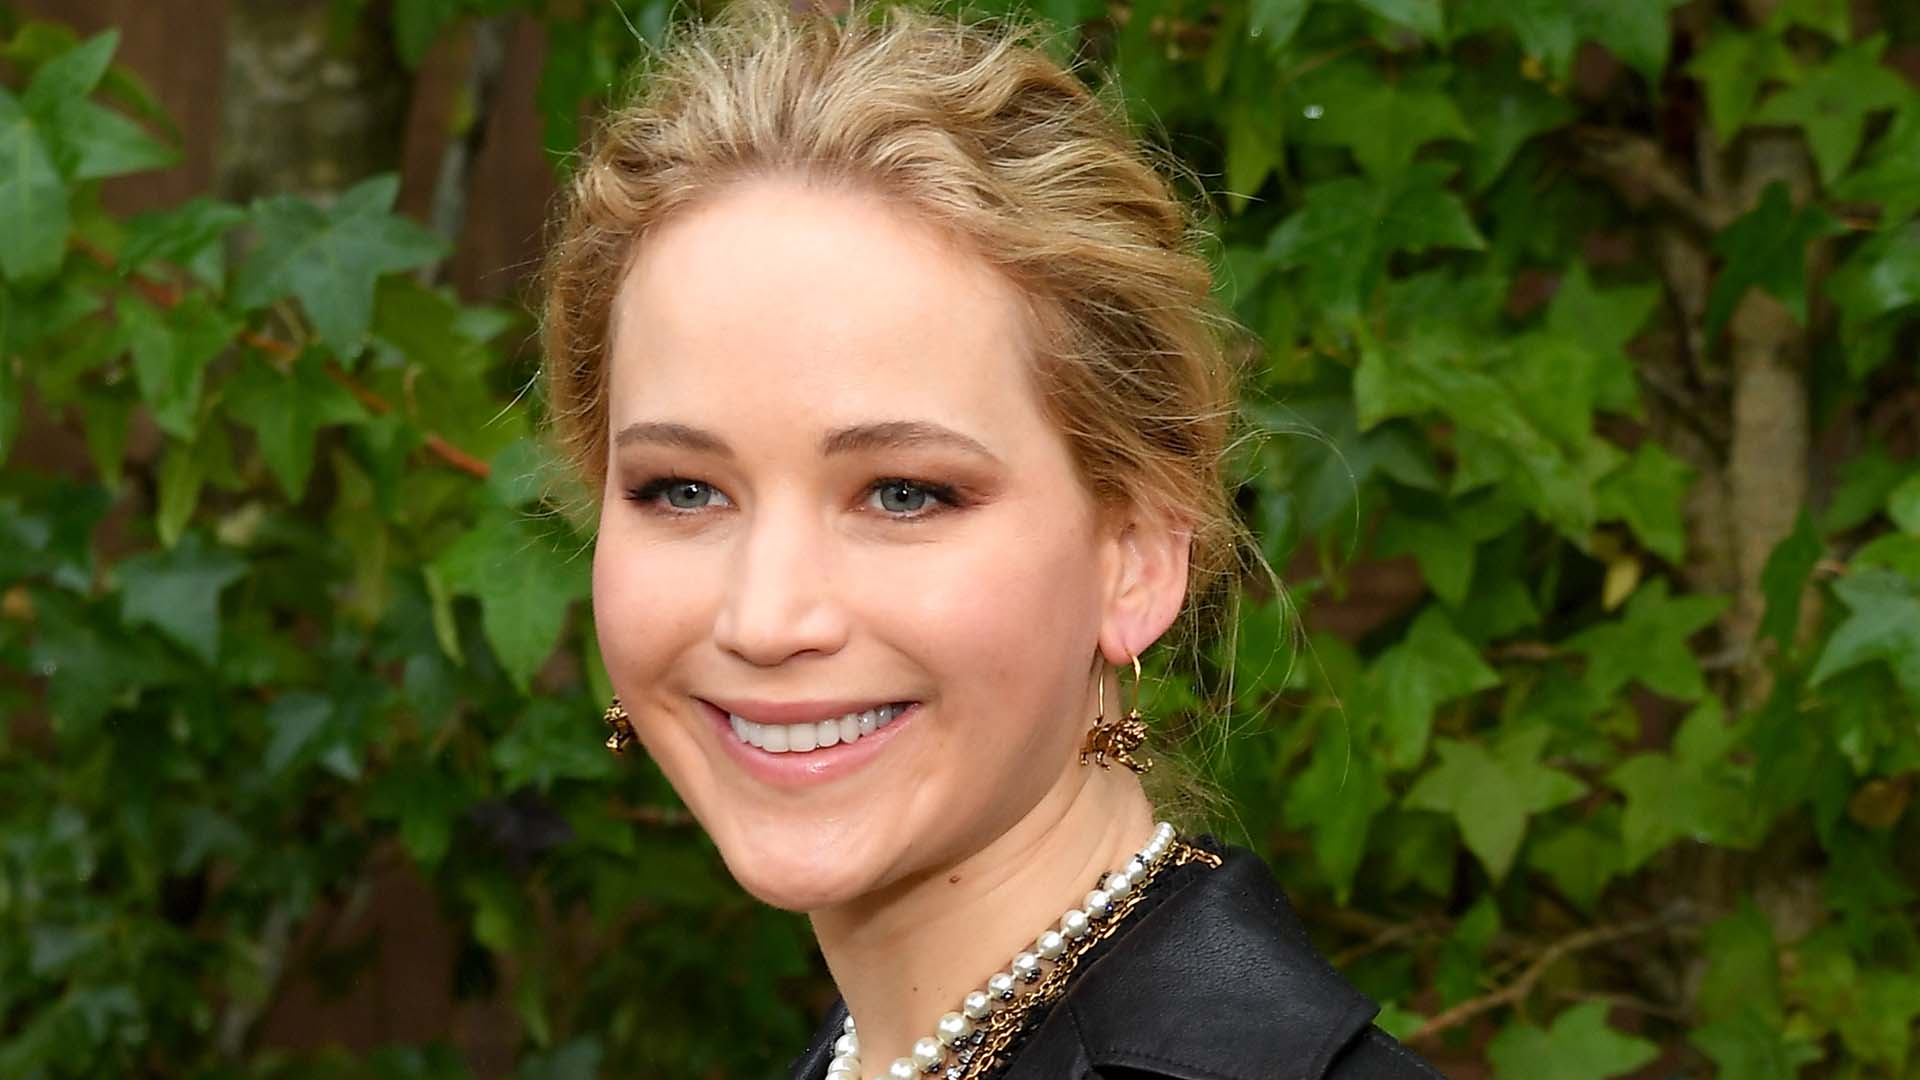 Casting News: Jennifer Lawrence to Star in Comedy 'No Hard Feelings' 